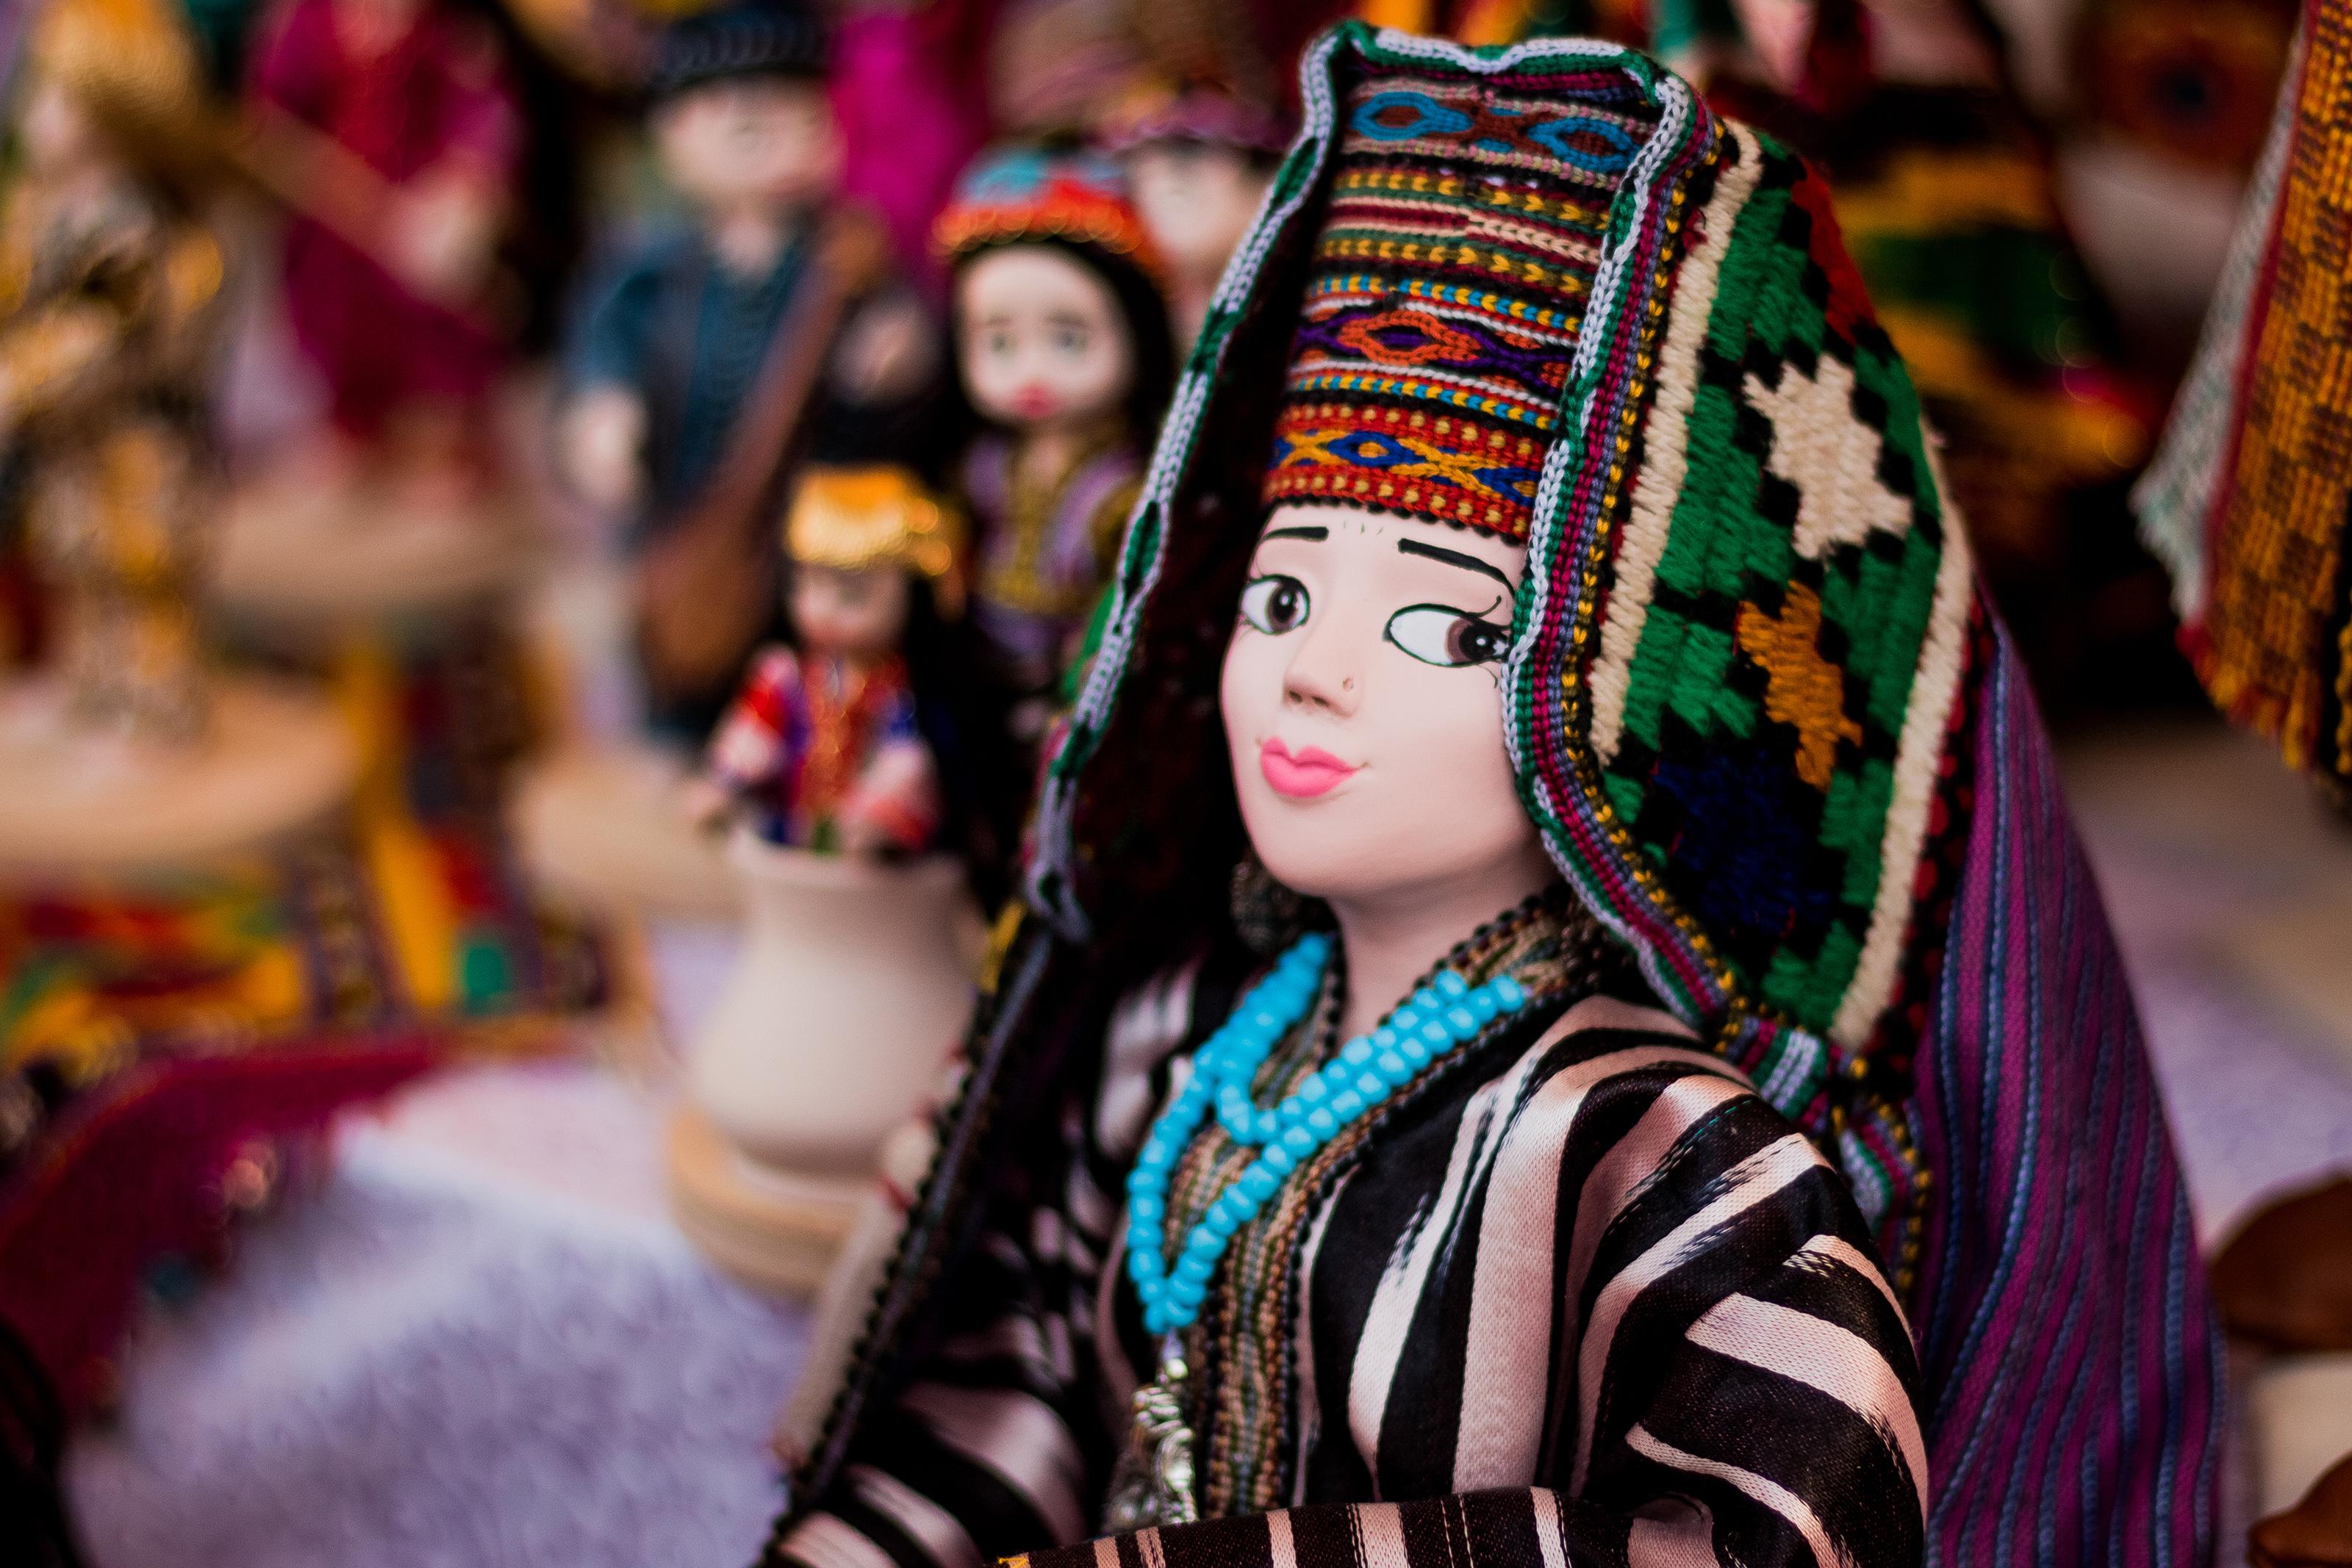 Details of a puppet - Photo by metronoise / Shutterstock